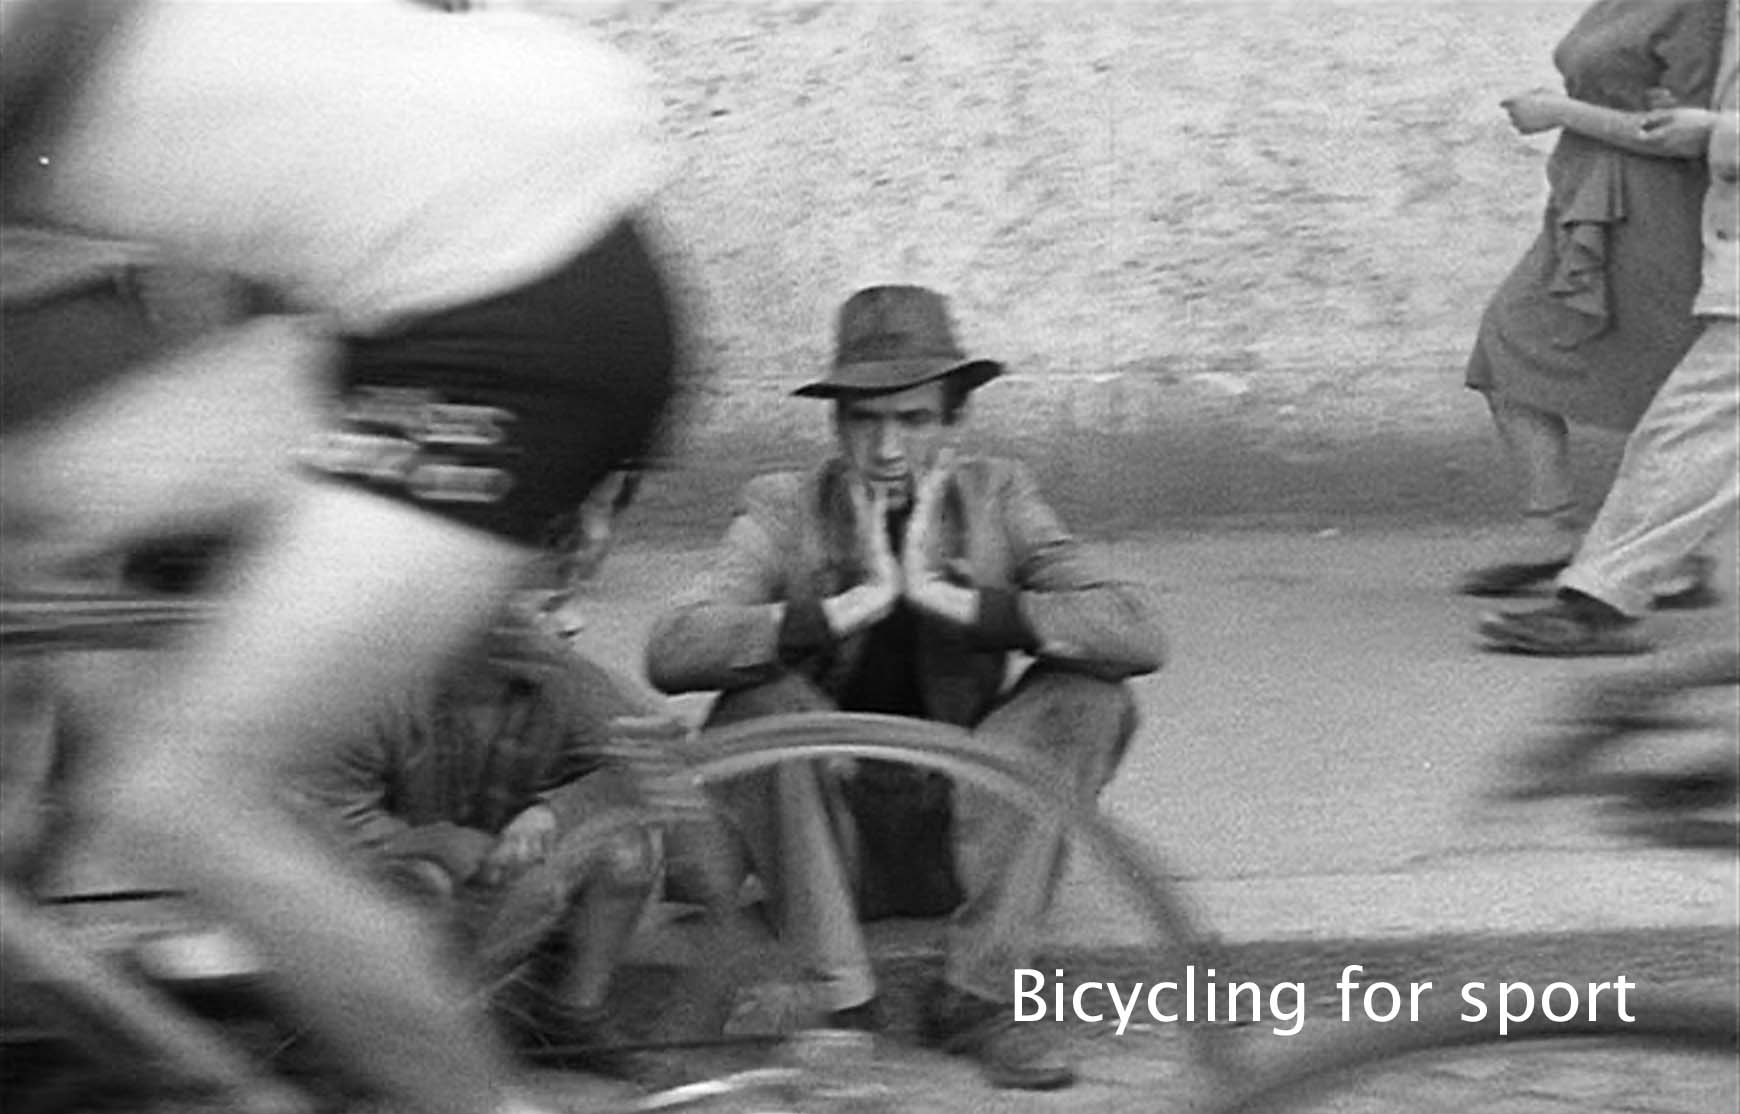 Bicycling for sport